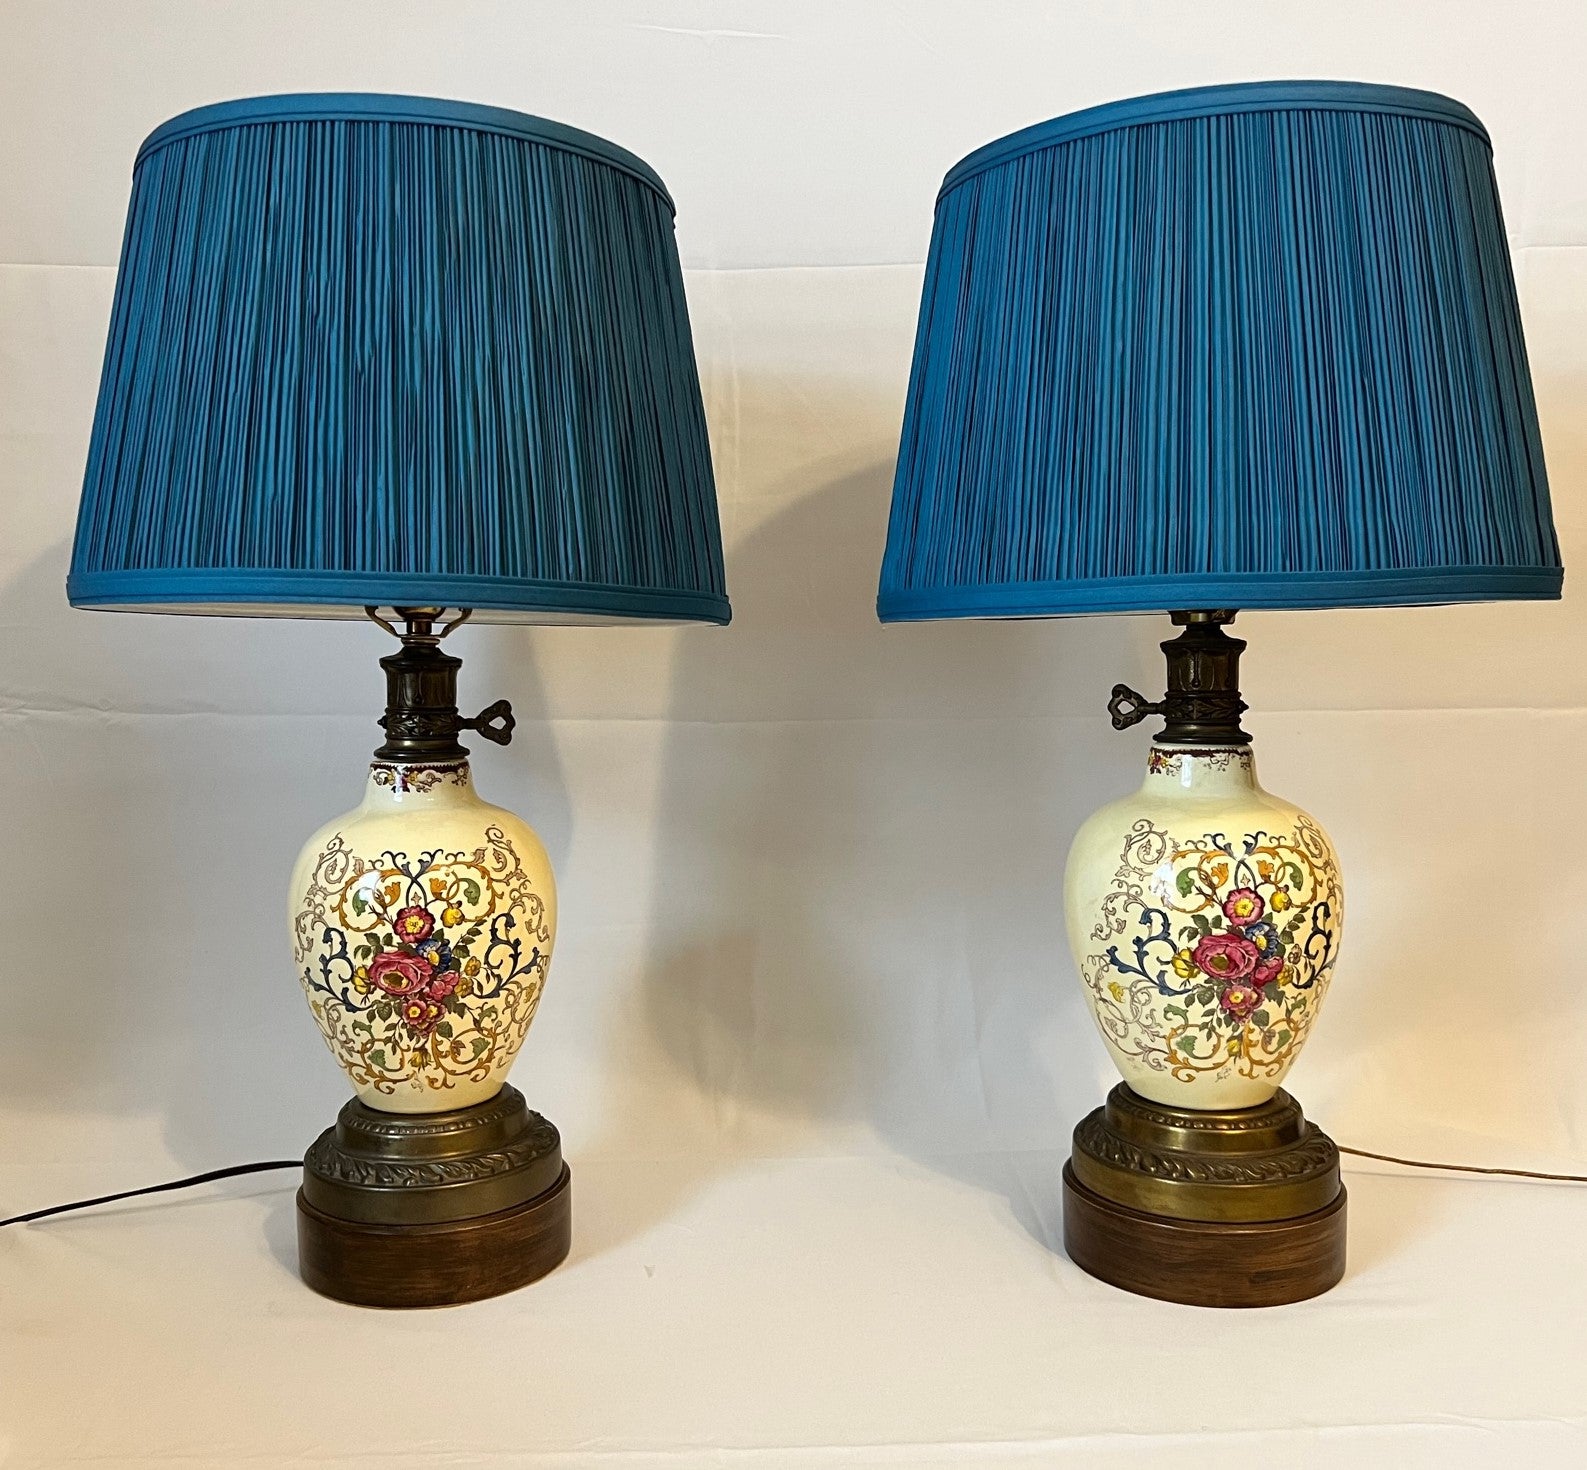 Vintage Ginger Jar Lamps in a Masons Nabob Style, a Pair with New Lamp Shades For Sale